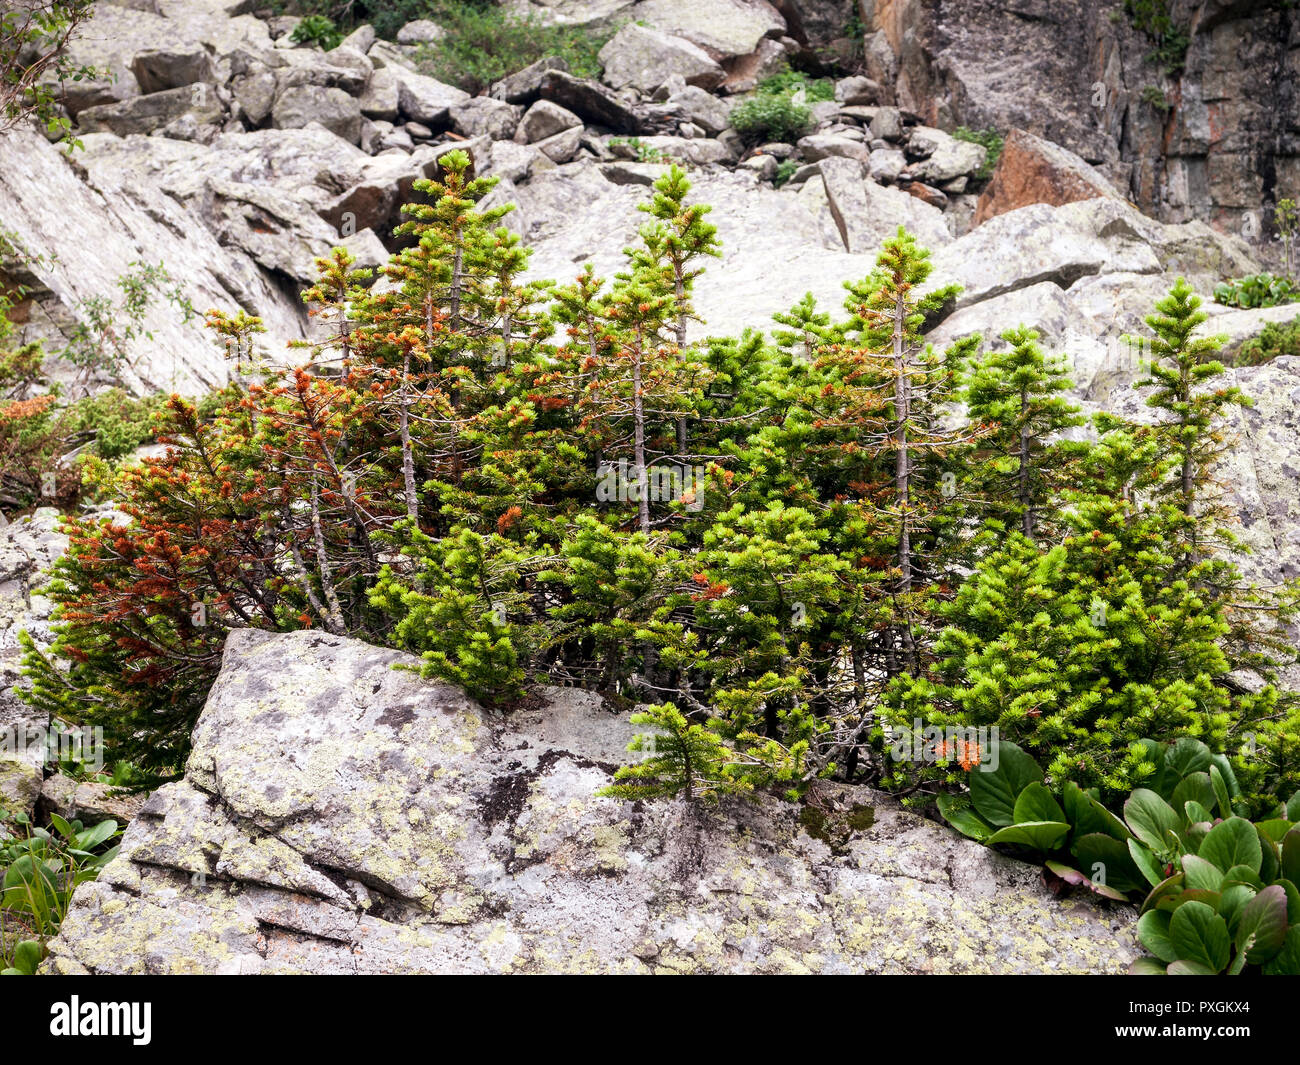 Stunted trees growing on a rock in the mountains Stock Photo